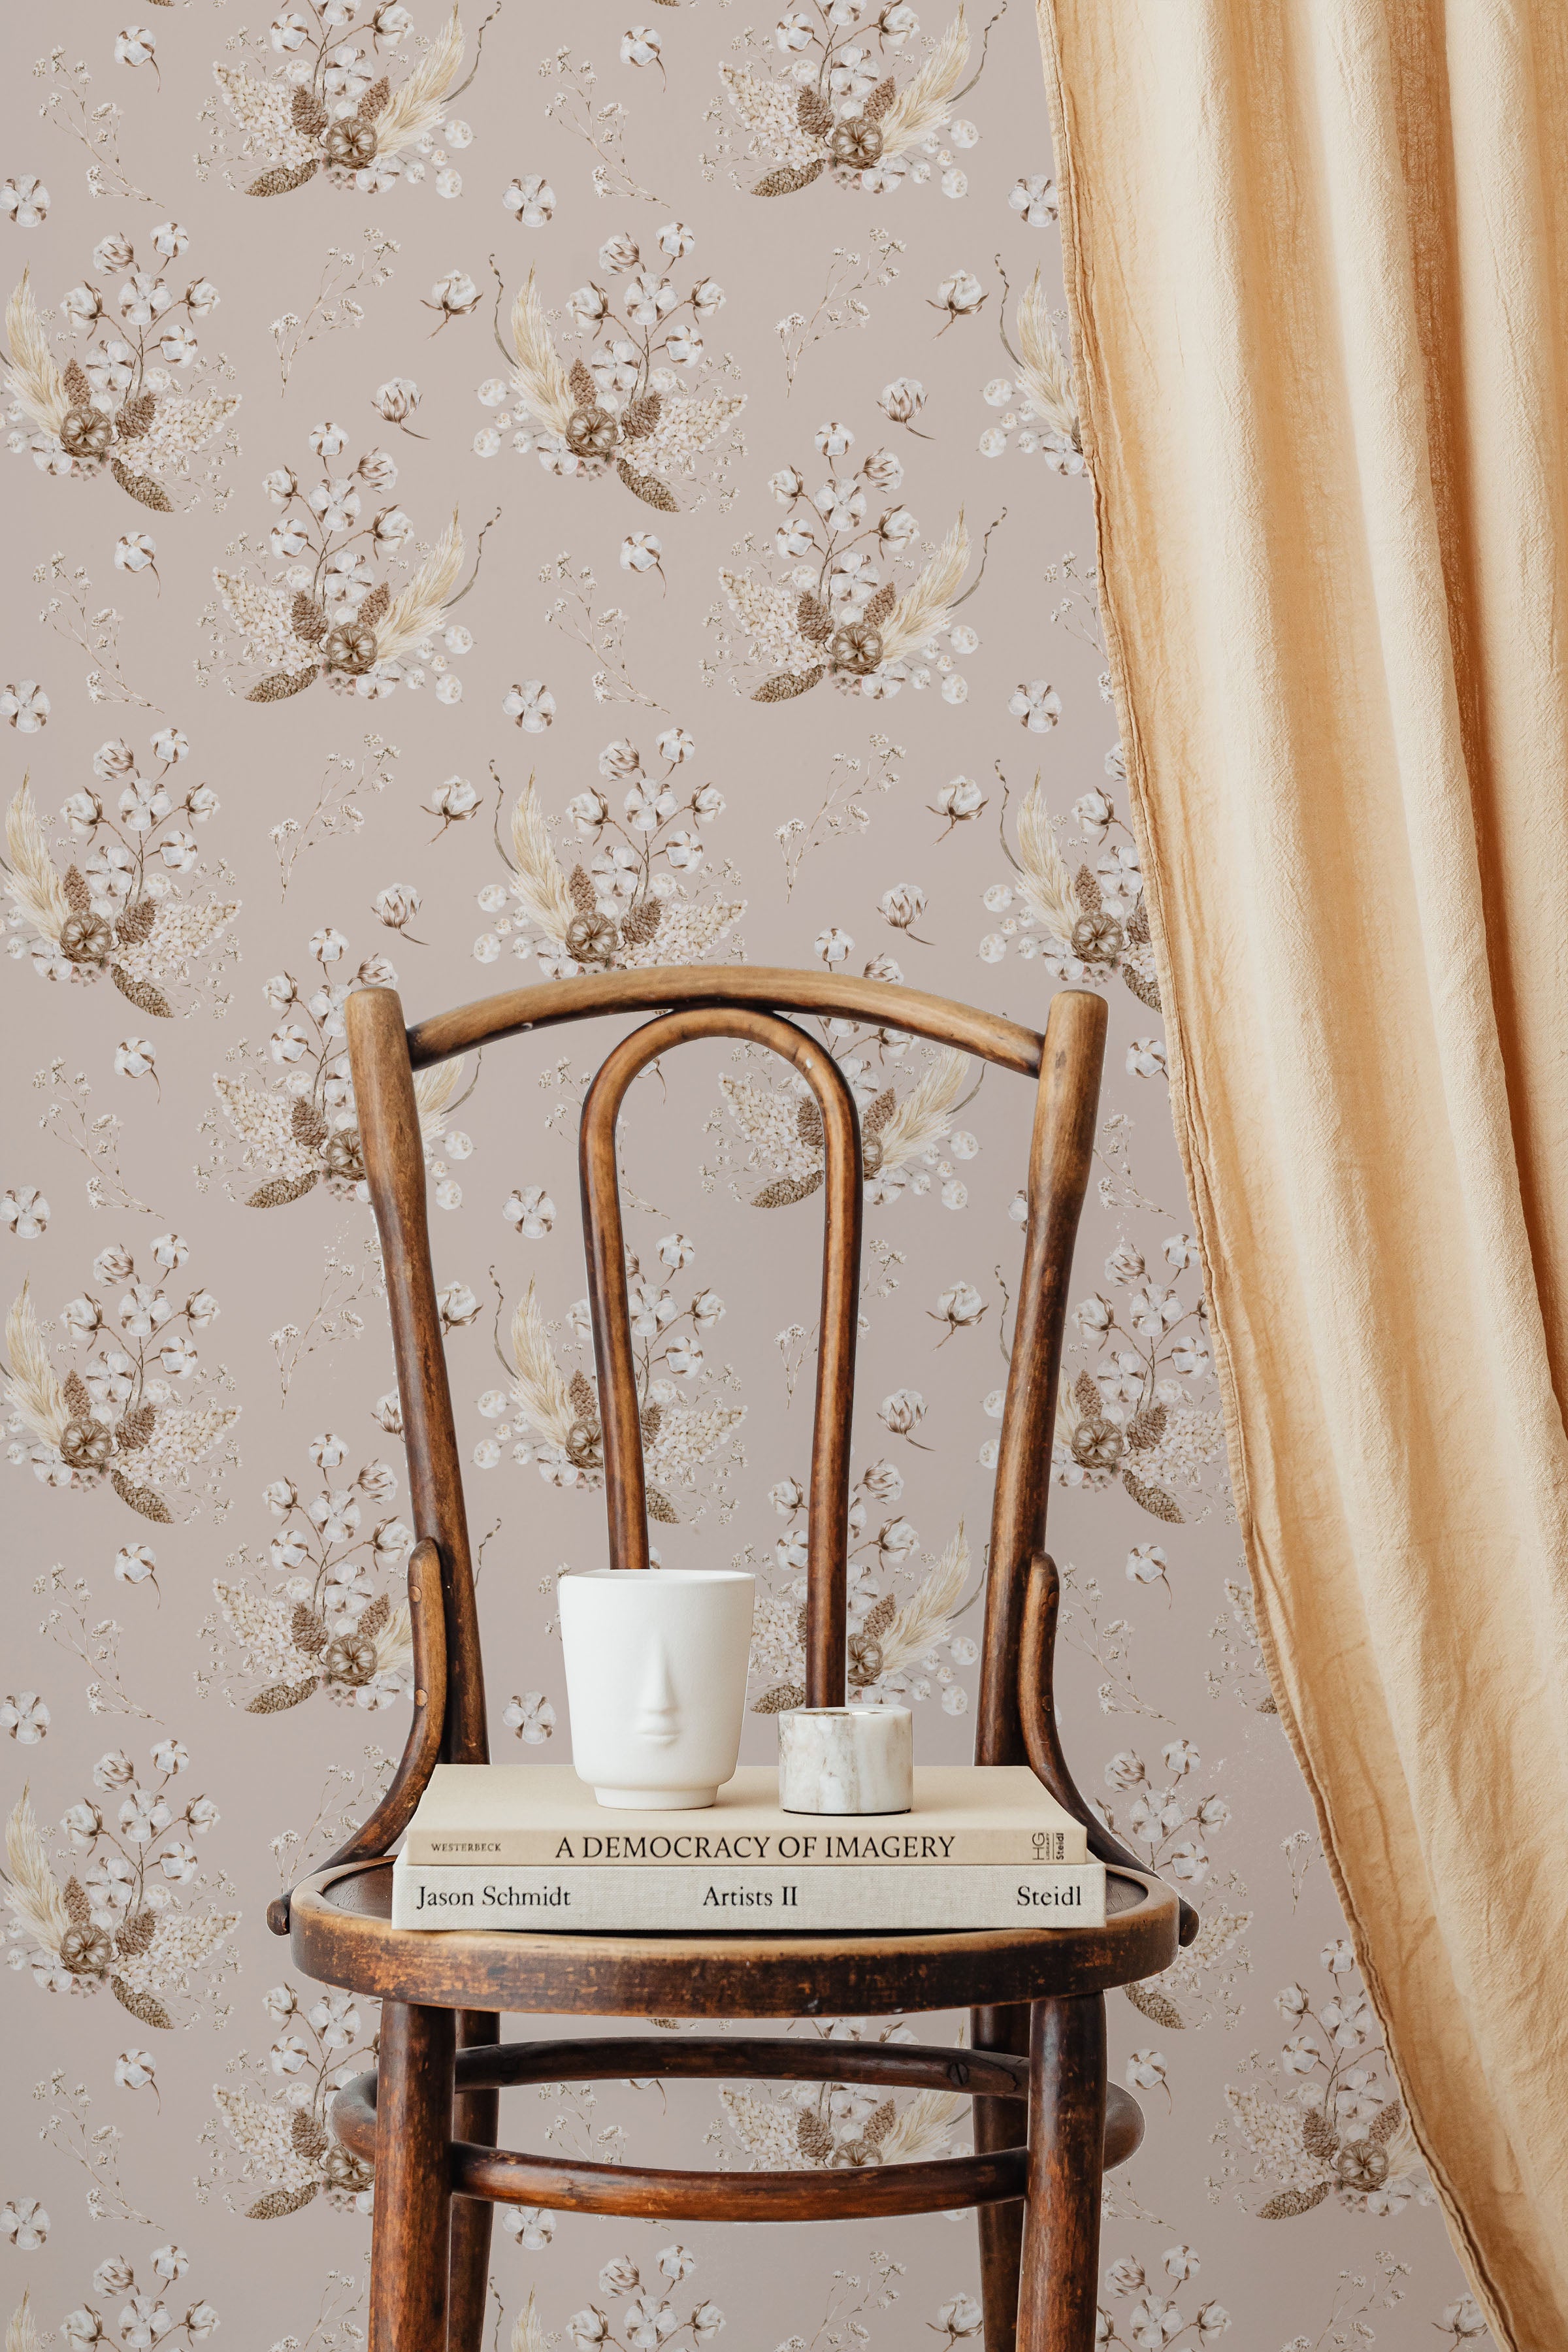 An elegant, vintage wooden chair against a wall covered with 'Boho Bouquet II Wallpaper', featuring clusters of delicate flowers and leaves in soft pinks and golds against a muted pink background. On the chair, a white sculptural face mug and a small marble candle holder sit atop a couple of hardcover books, adding to the room’s bohemian chic aesthetic.